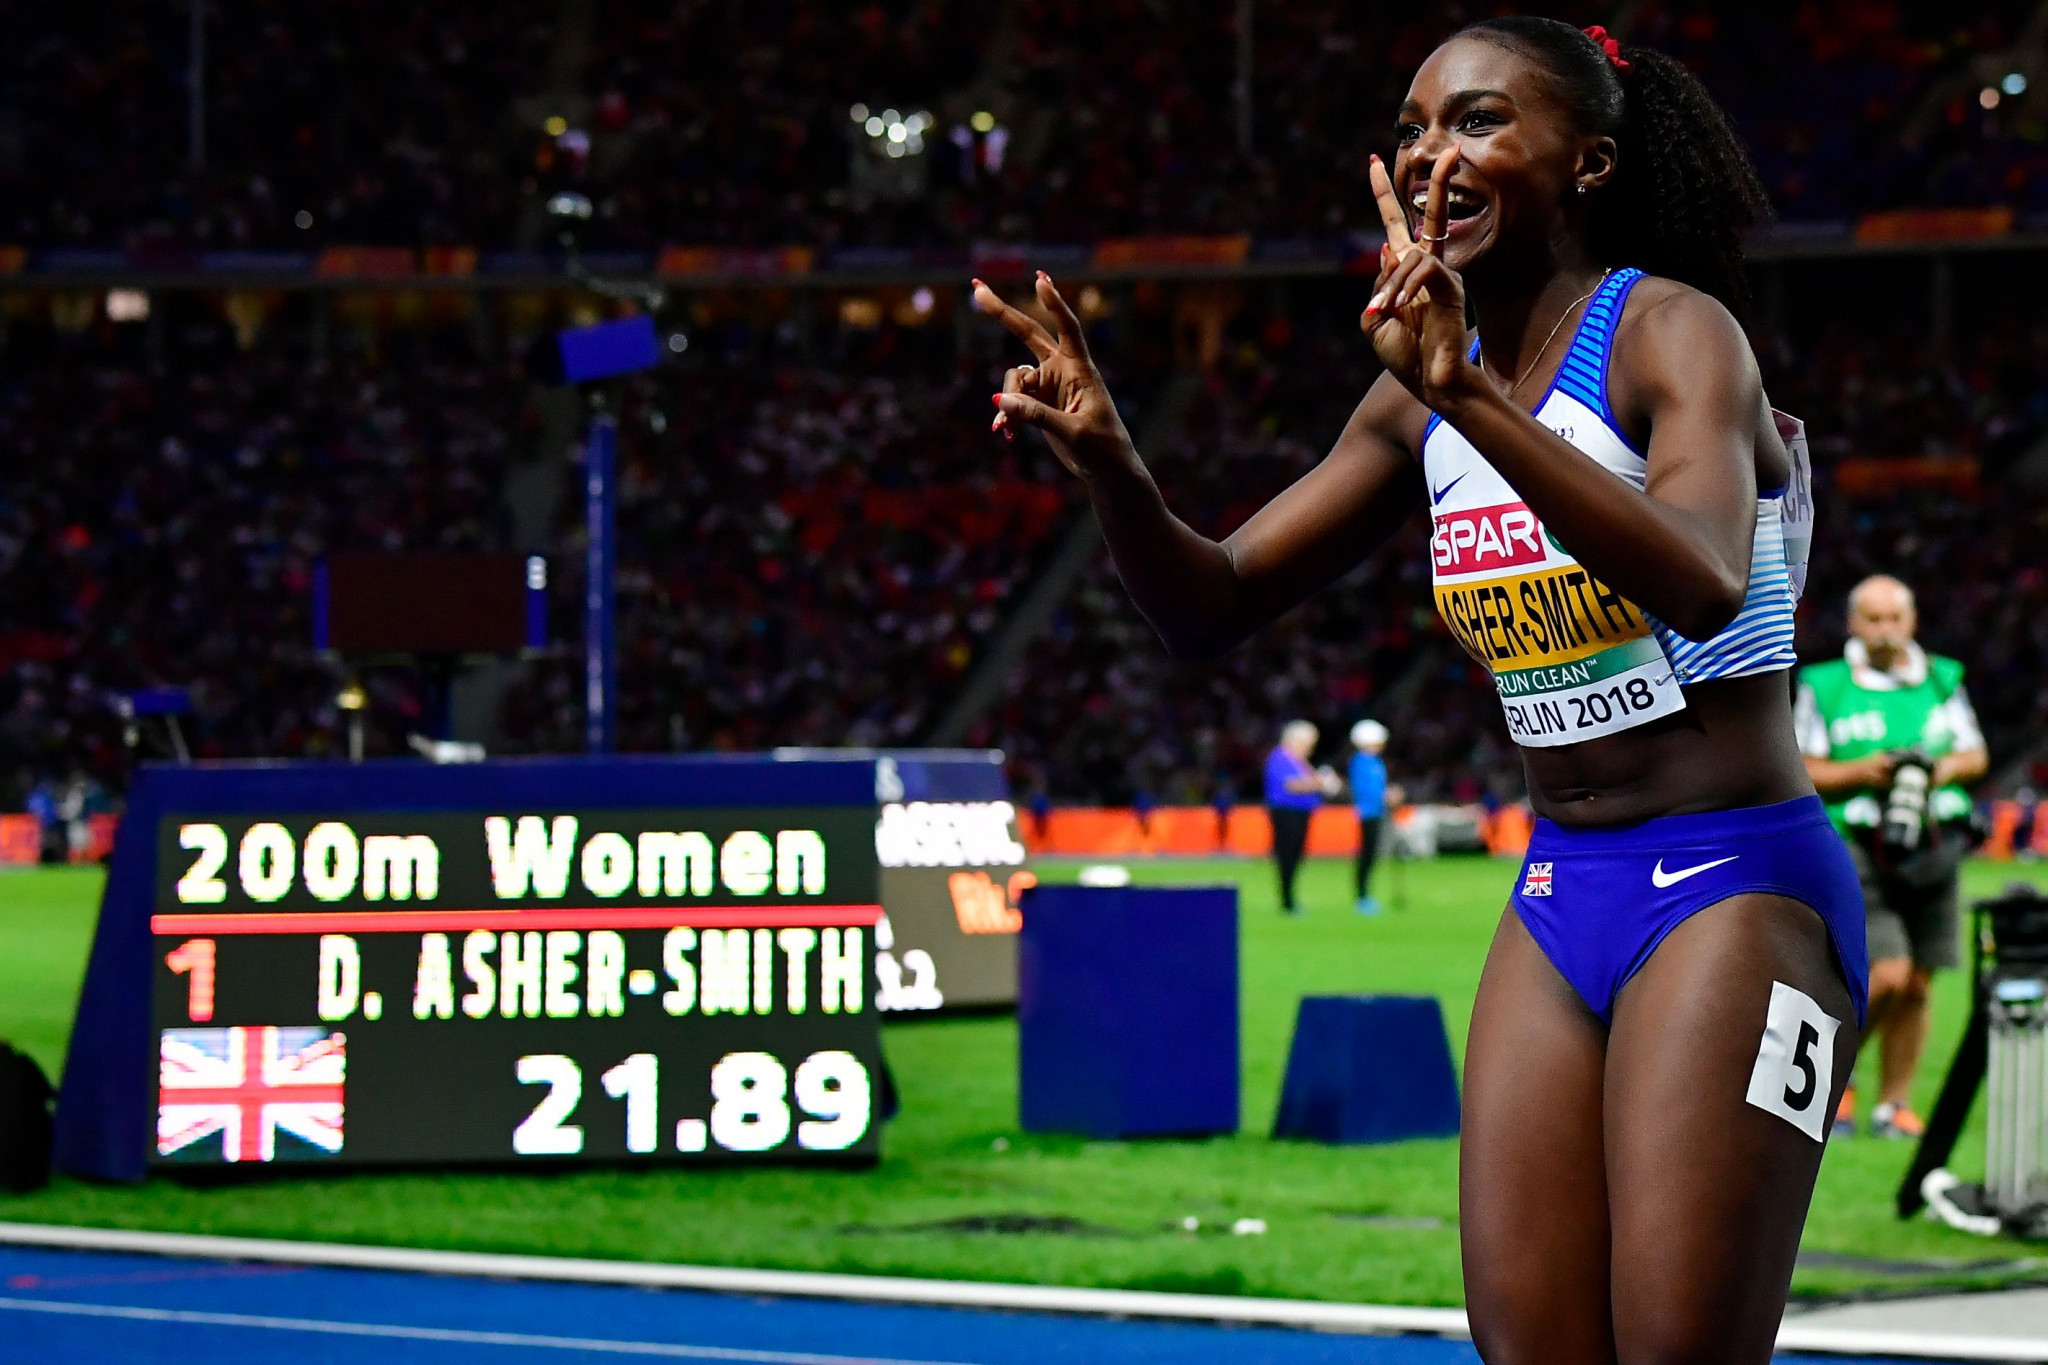 Over in Berlin at the European Athletics Championships, Britain's Dina Asher-Smith completed the women's sprint double by winning the 200m in 21.89sec - the fastest time in the world this year ©Getty Images